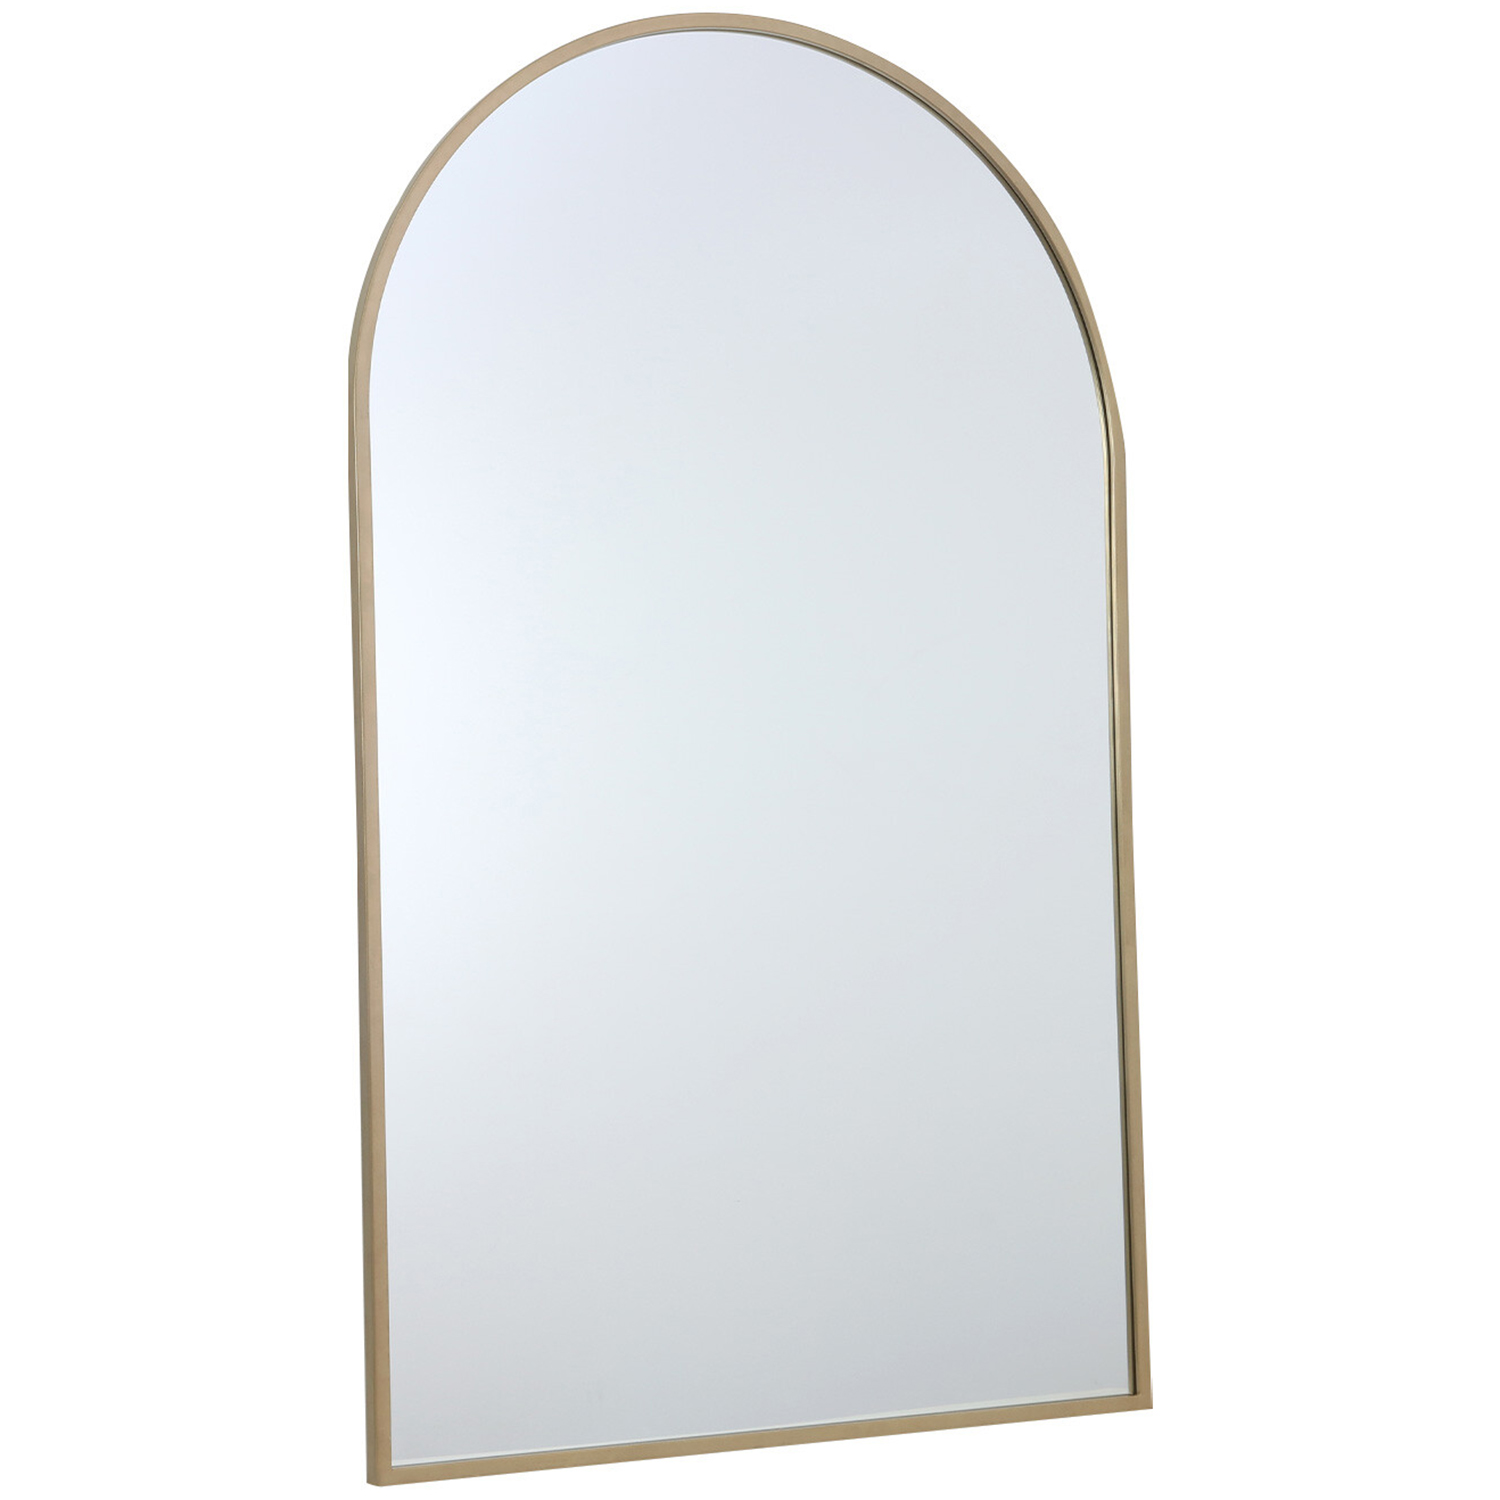 Gold Wide Metal Arch Mirror 180 x 110cm Image 2